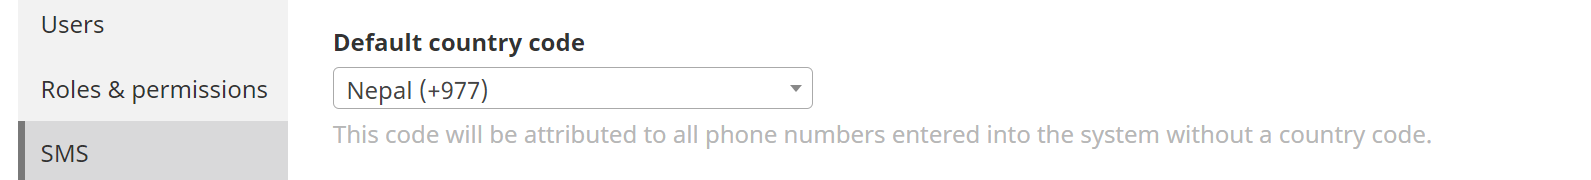 Default country code setting